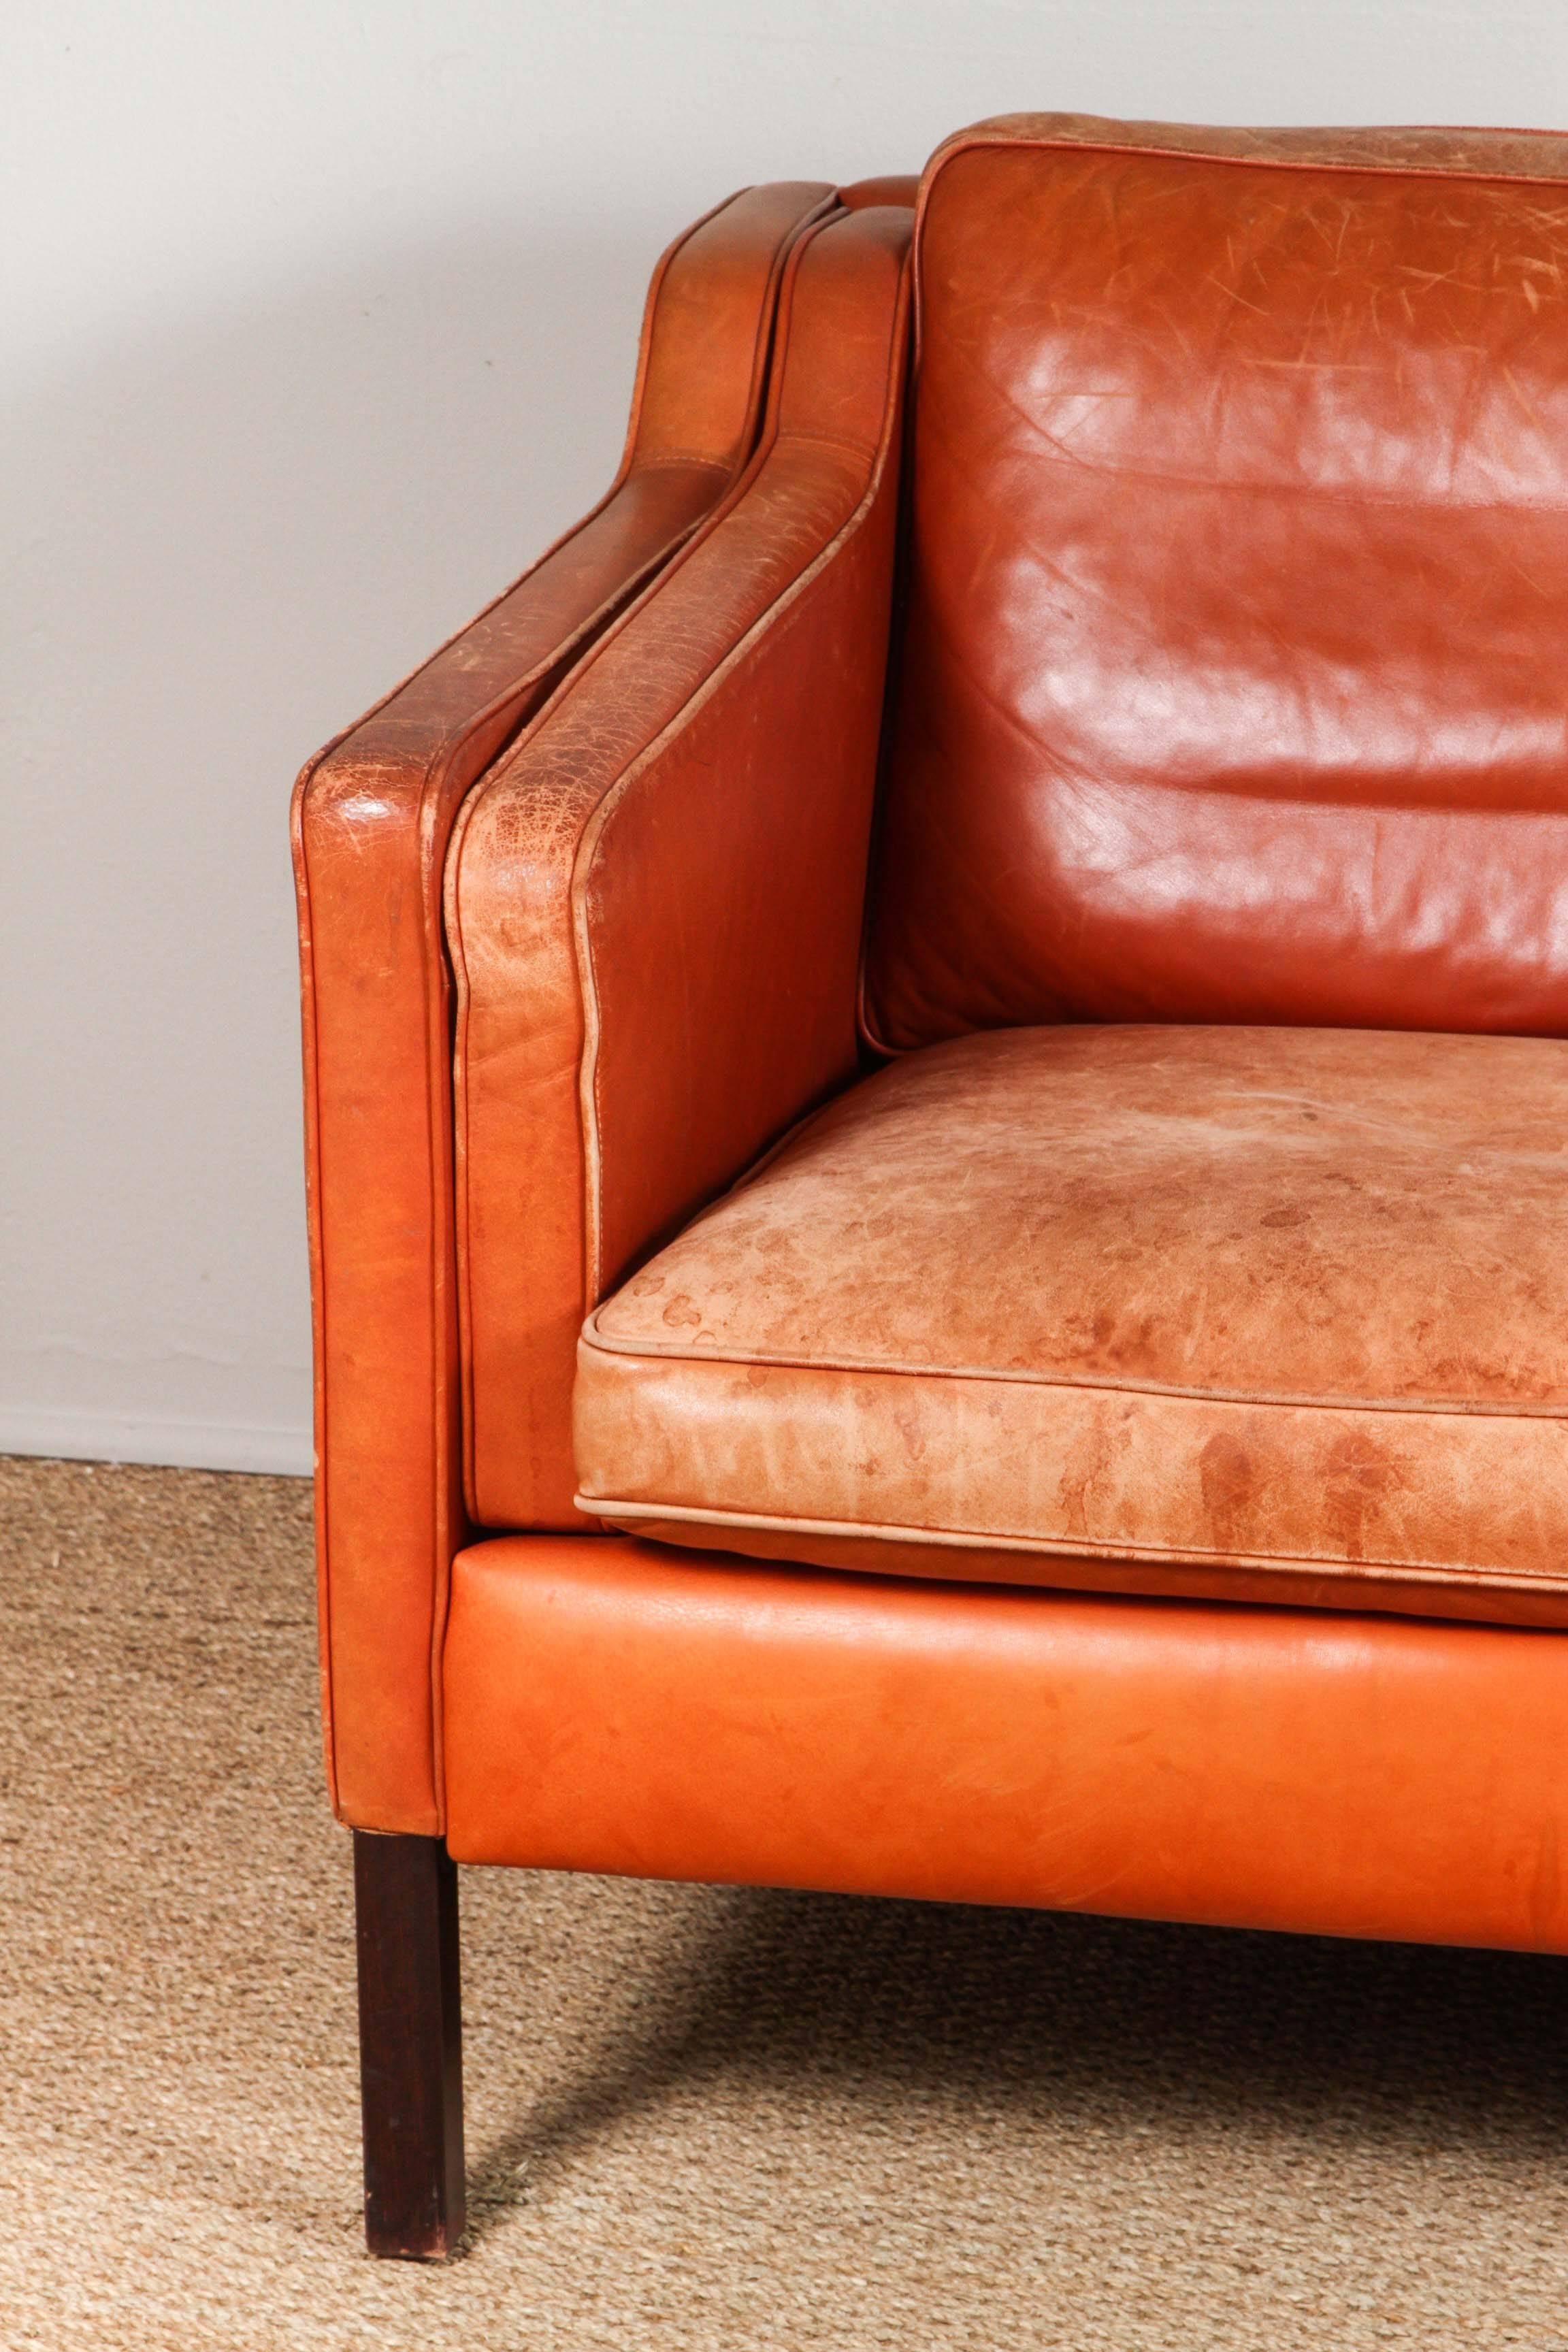 Distressed leather upholstery. Worn especially on seat cushions but no rips, holes or split seams.